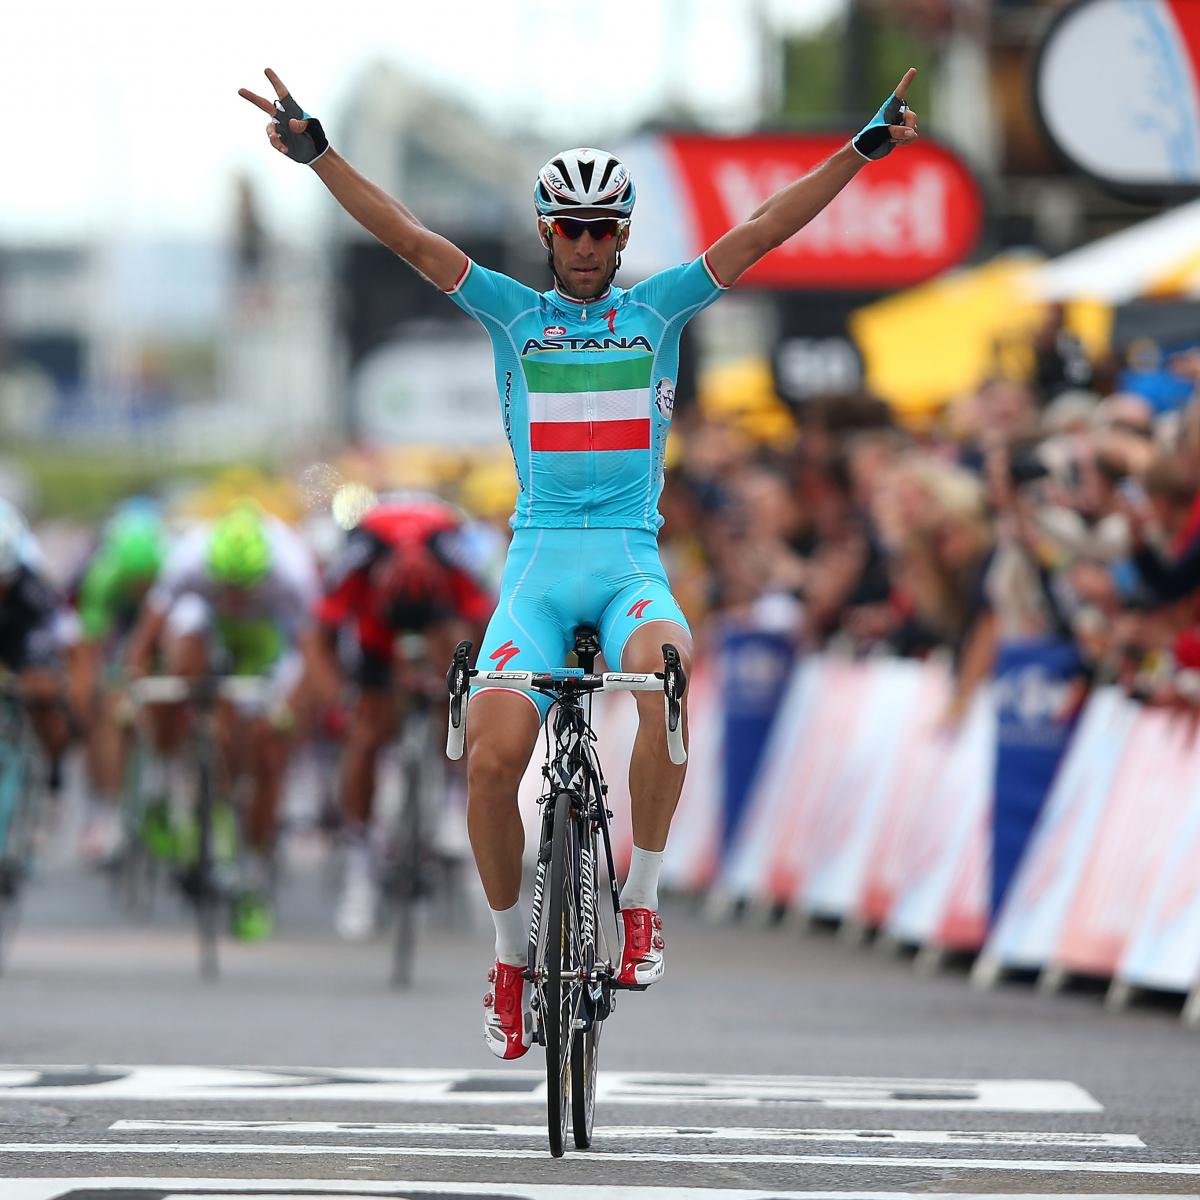 Tour de France 2014: Stage 2 Winner, Results and Updated Leaderboard